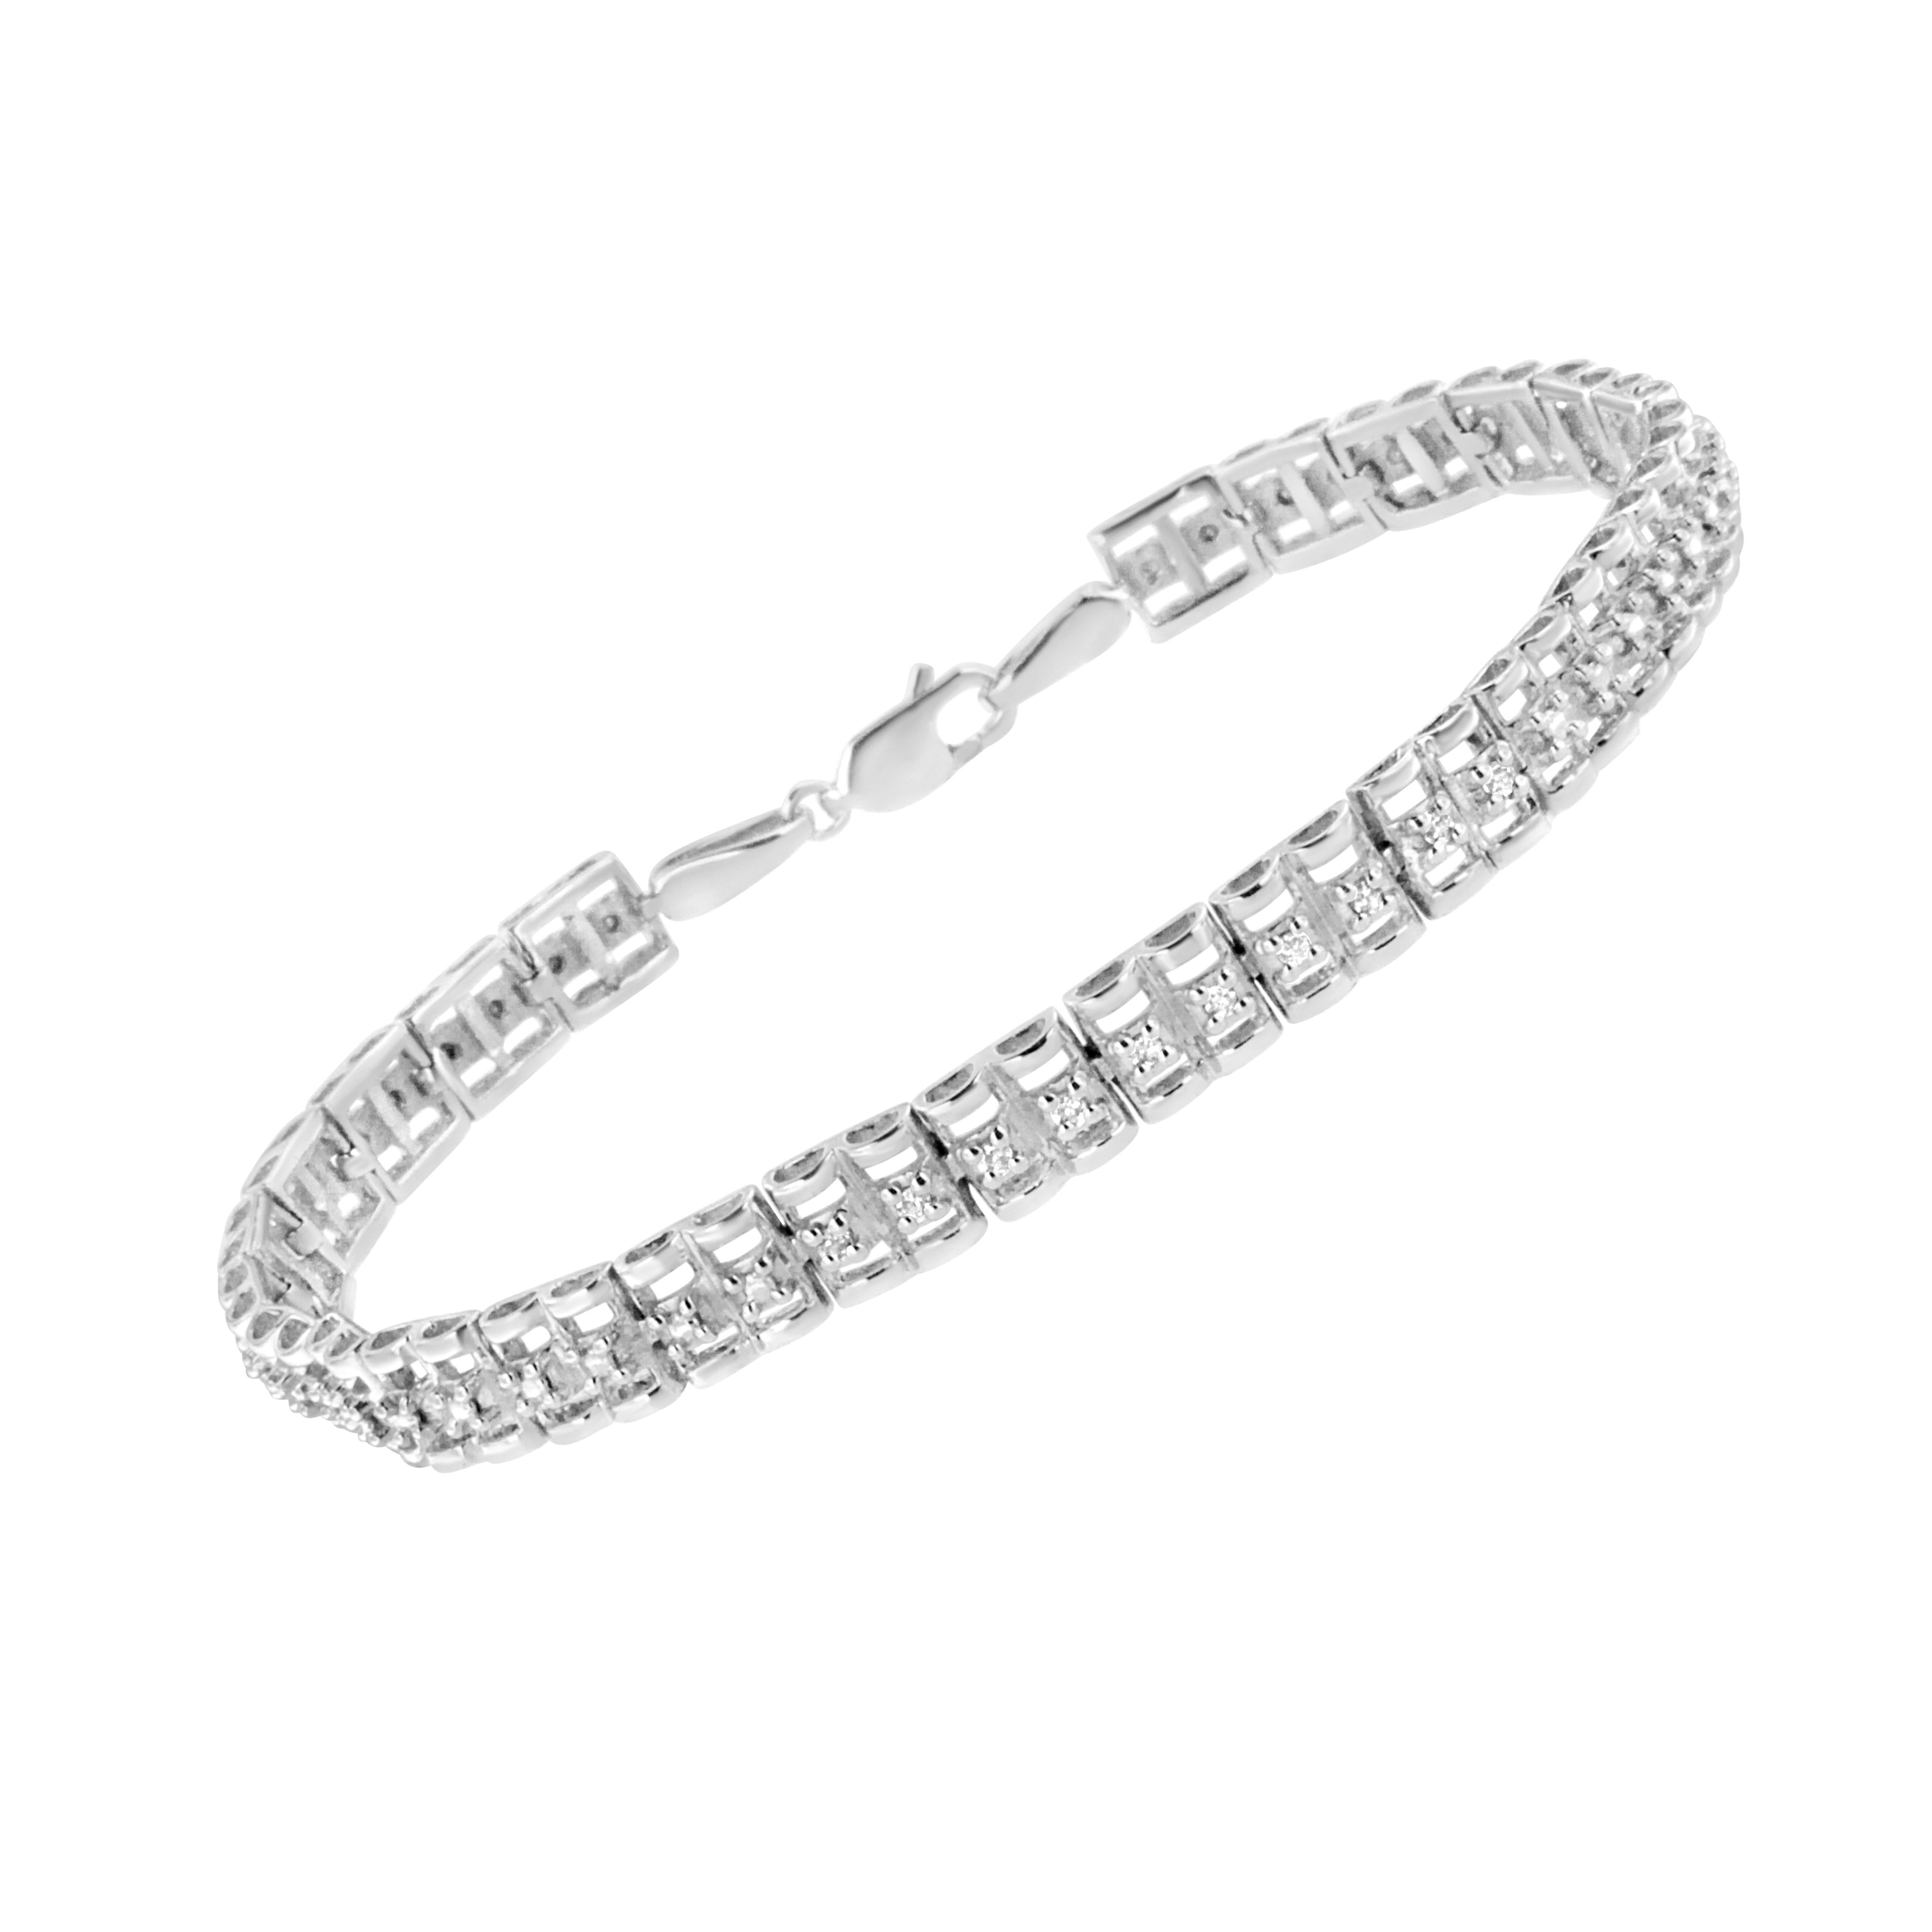 This lovely sterling silver bracelet features 1/10 cttw of beautiful, natural diamonds. The design of this piece features a repetitive pattern of vertical rows of a single round-cut, prong set diamond. This is a gorgeous and breathtaking gift for